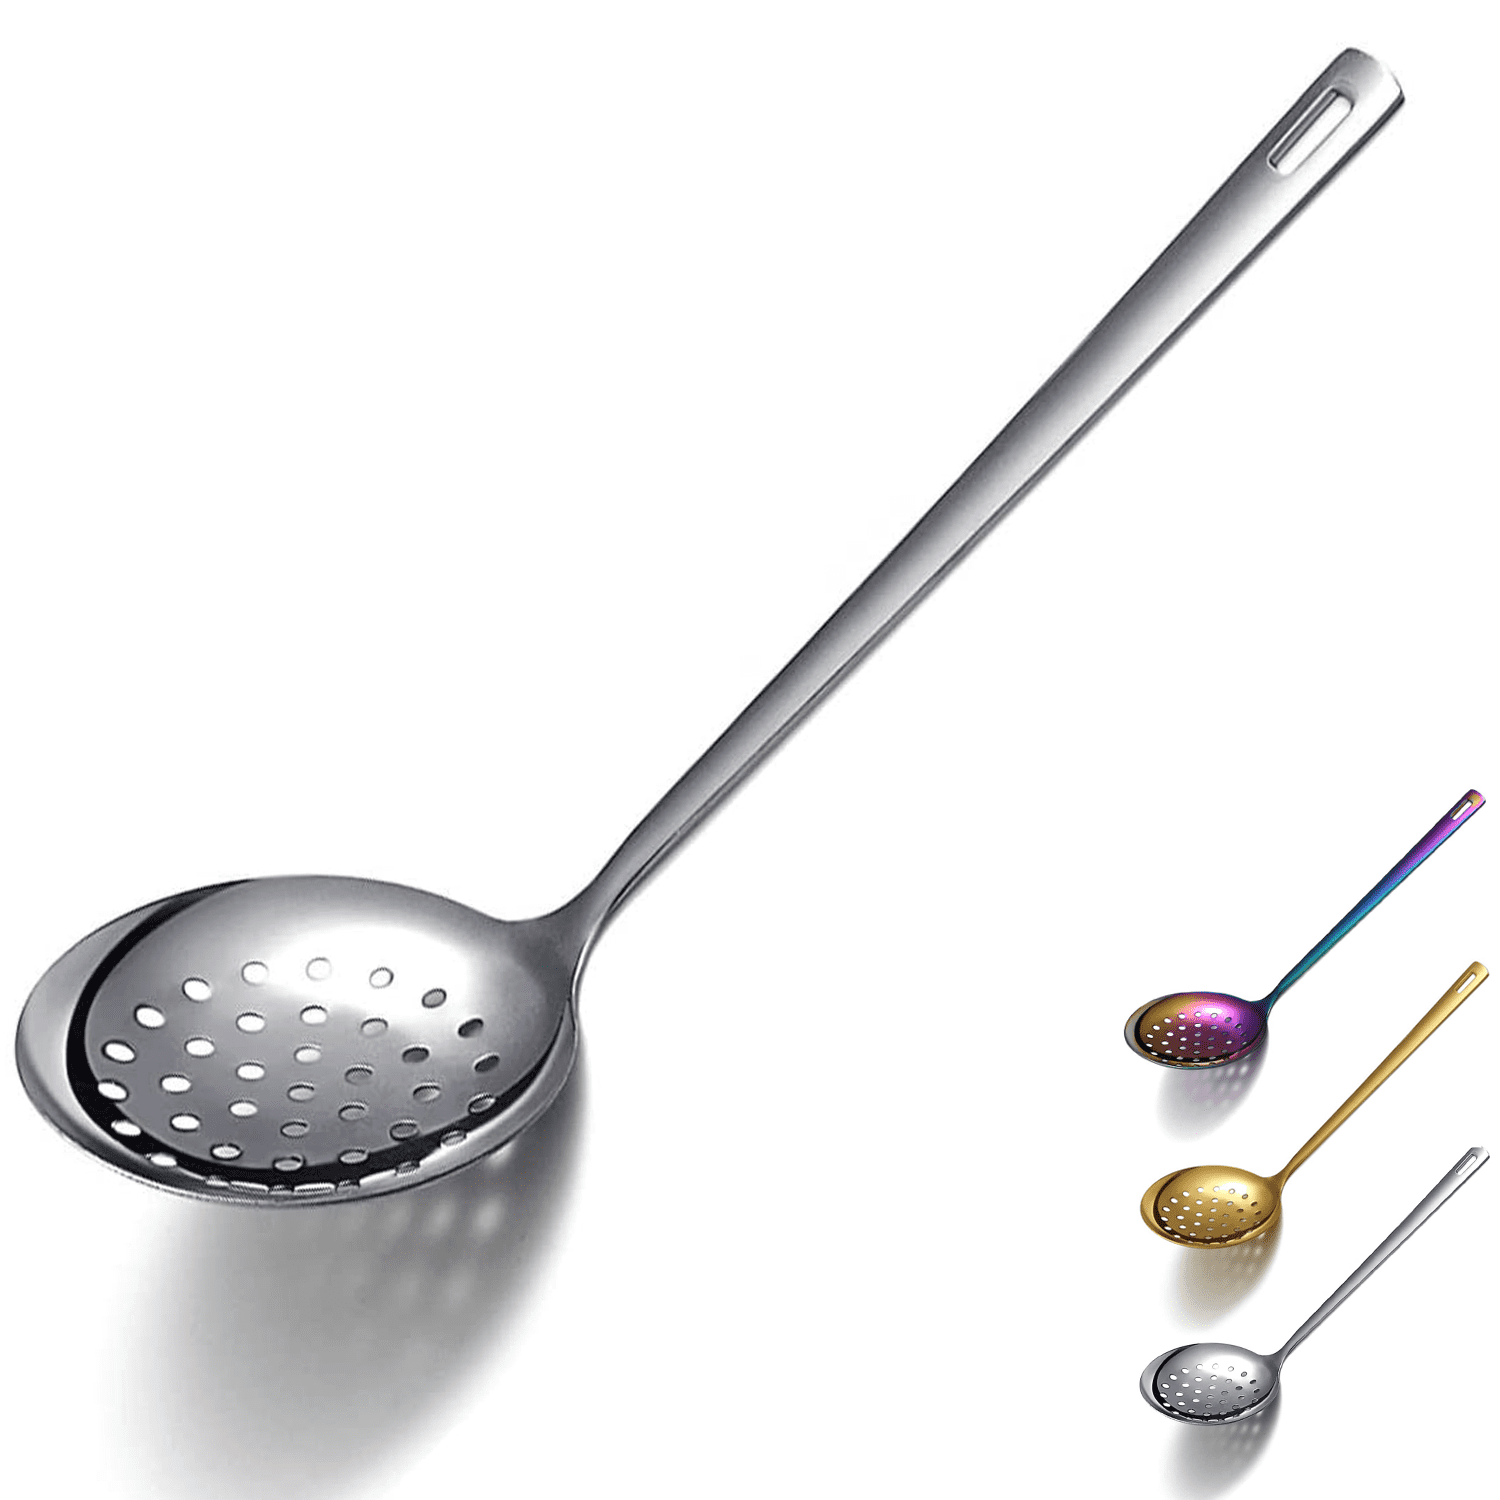 Buyer Star Soup Ladle Slotted Spoon Stainless Steel Cooking Spoon Skimmer Colander Strainer 11 inch Silver 